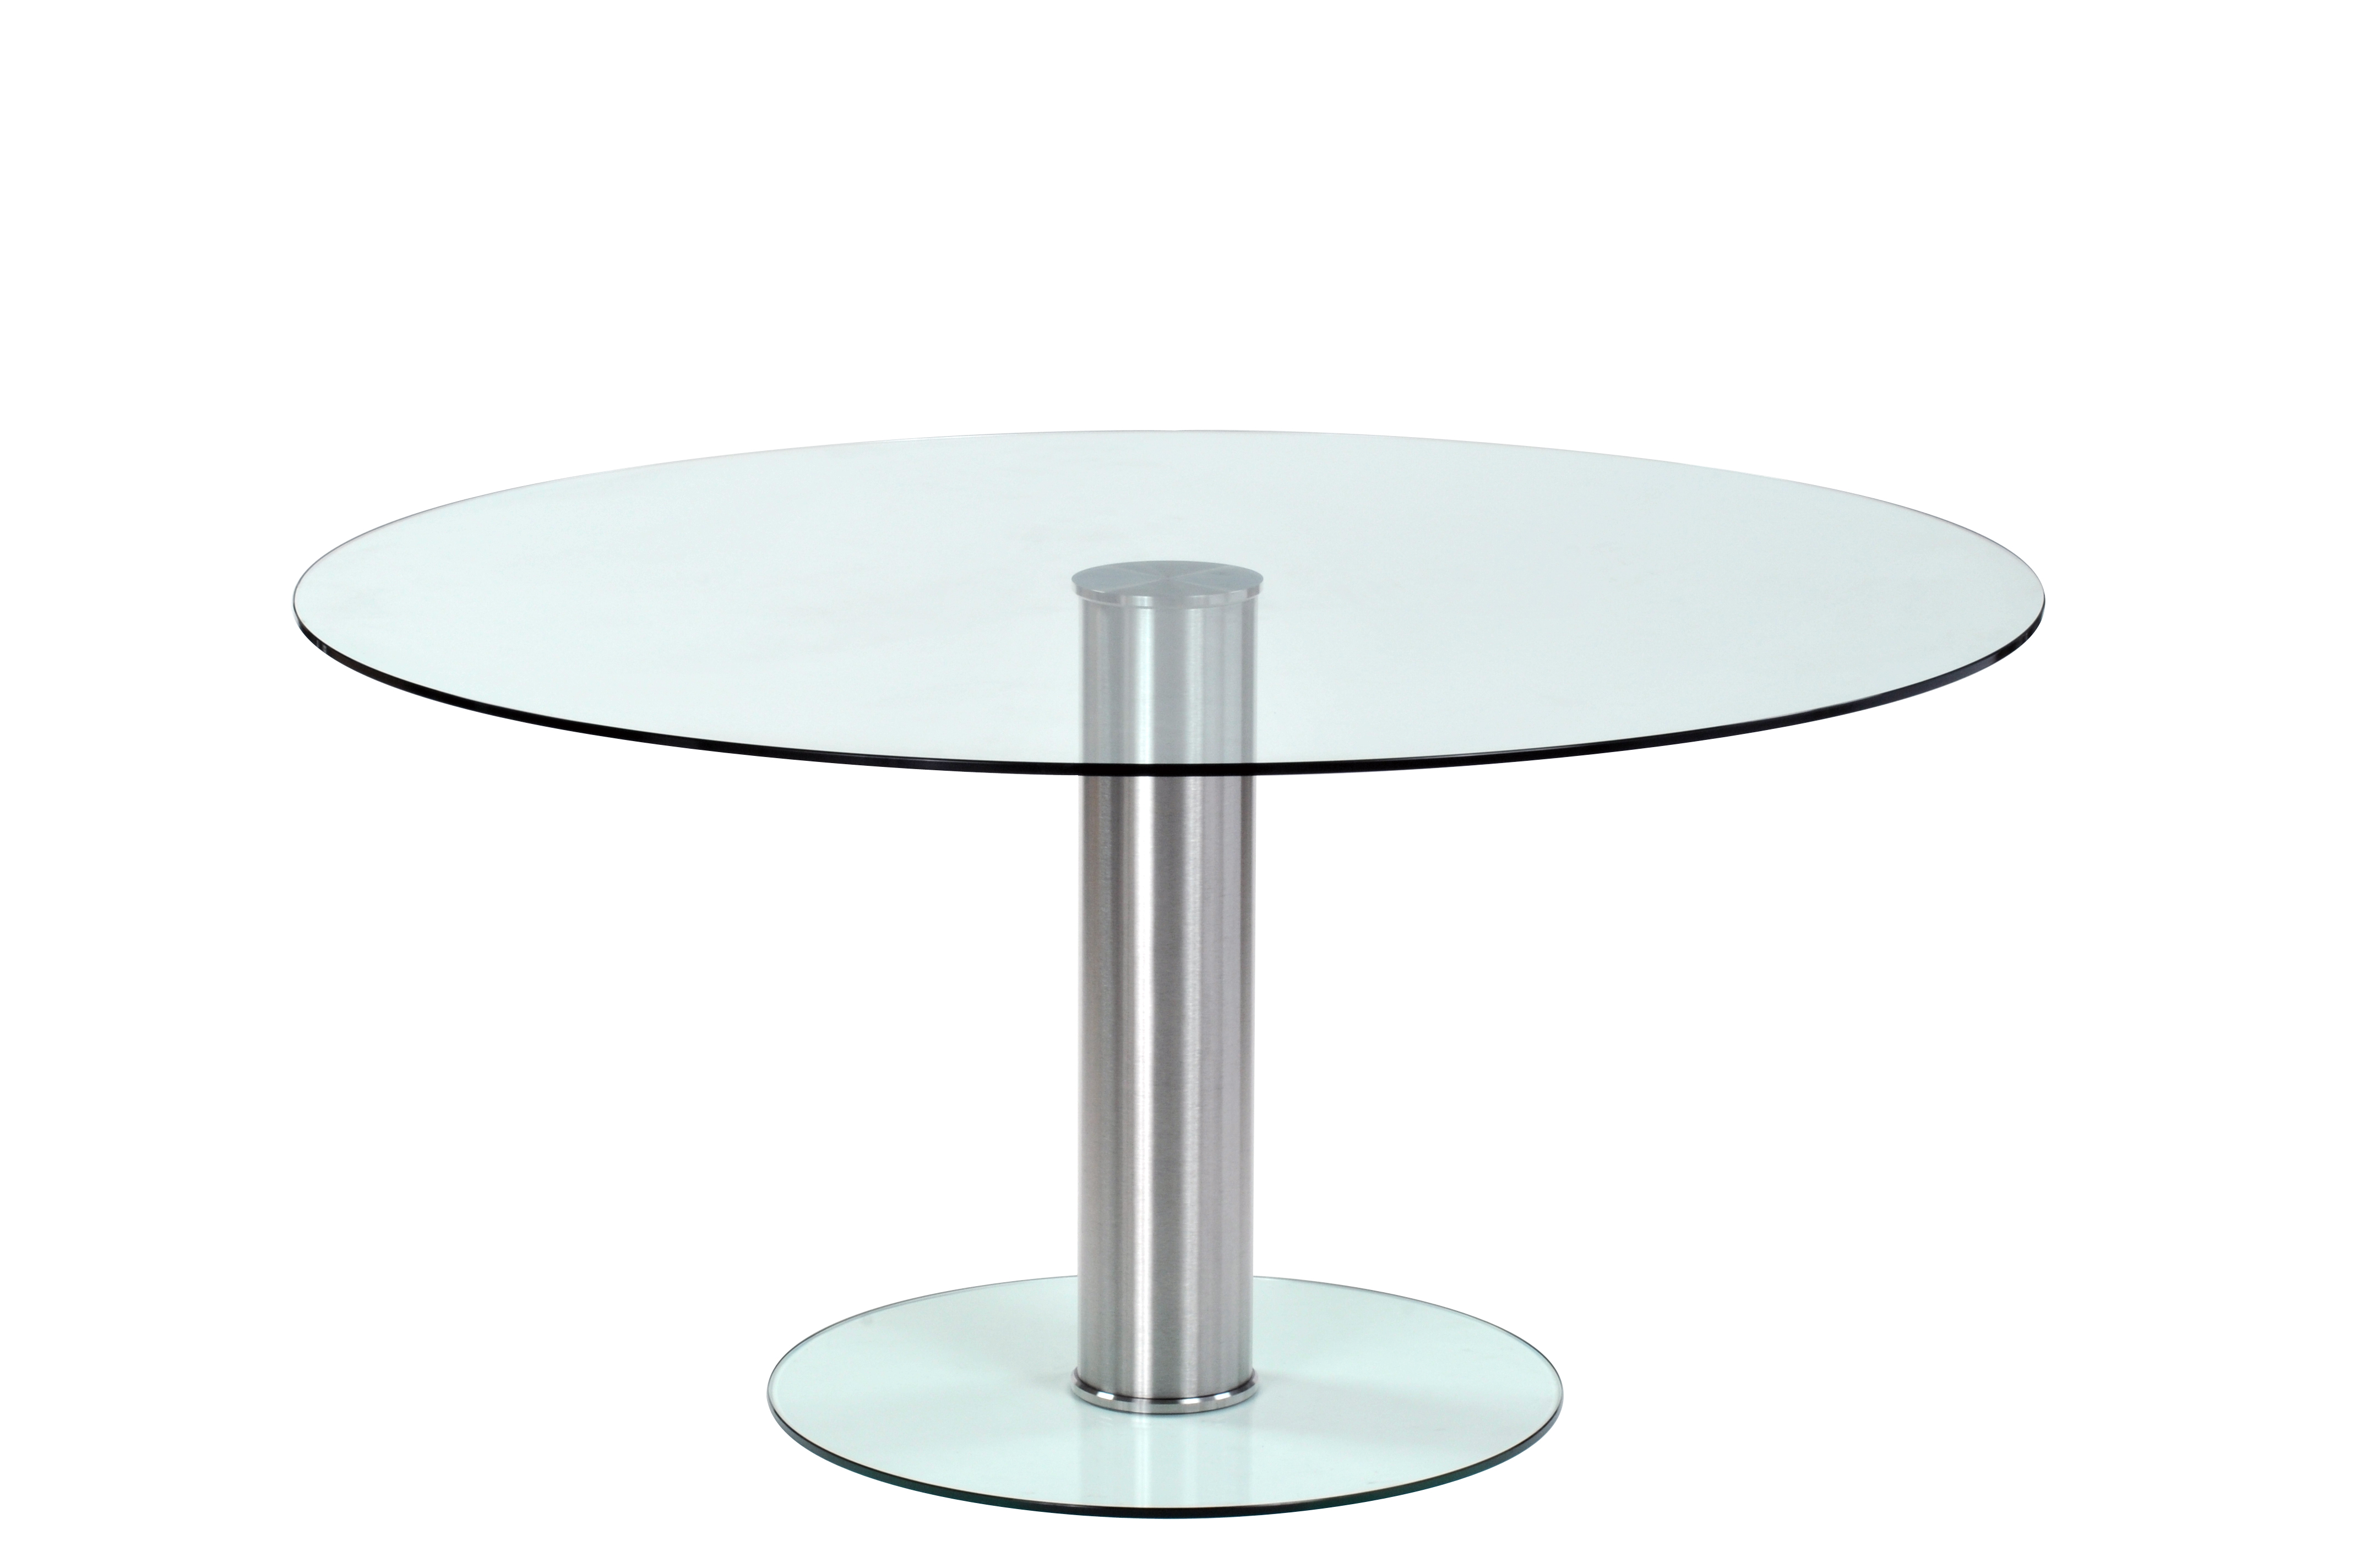 http://www.solutions-4.co.uk/wp-content/uploads/2012/07/Unique-Circular-Glass-Meeting-Table.jpg